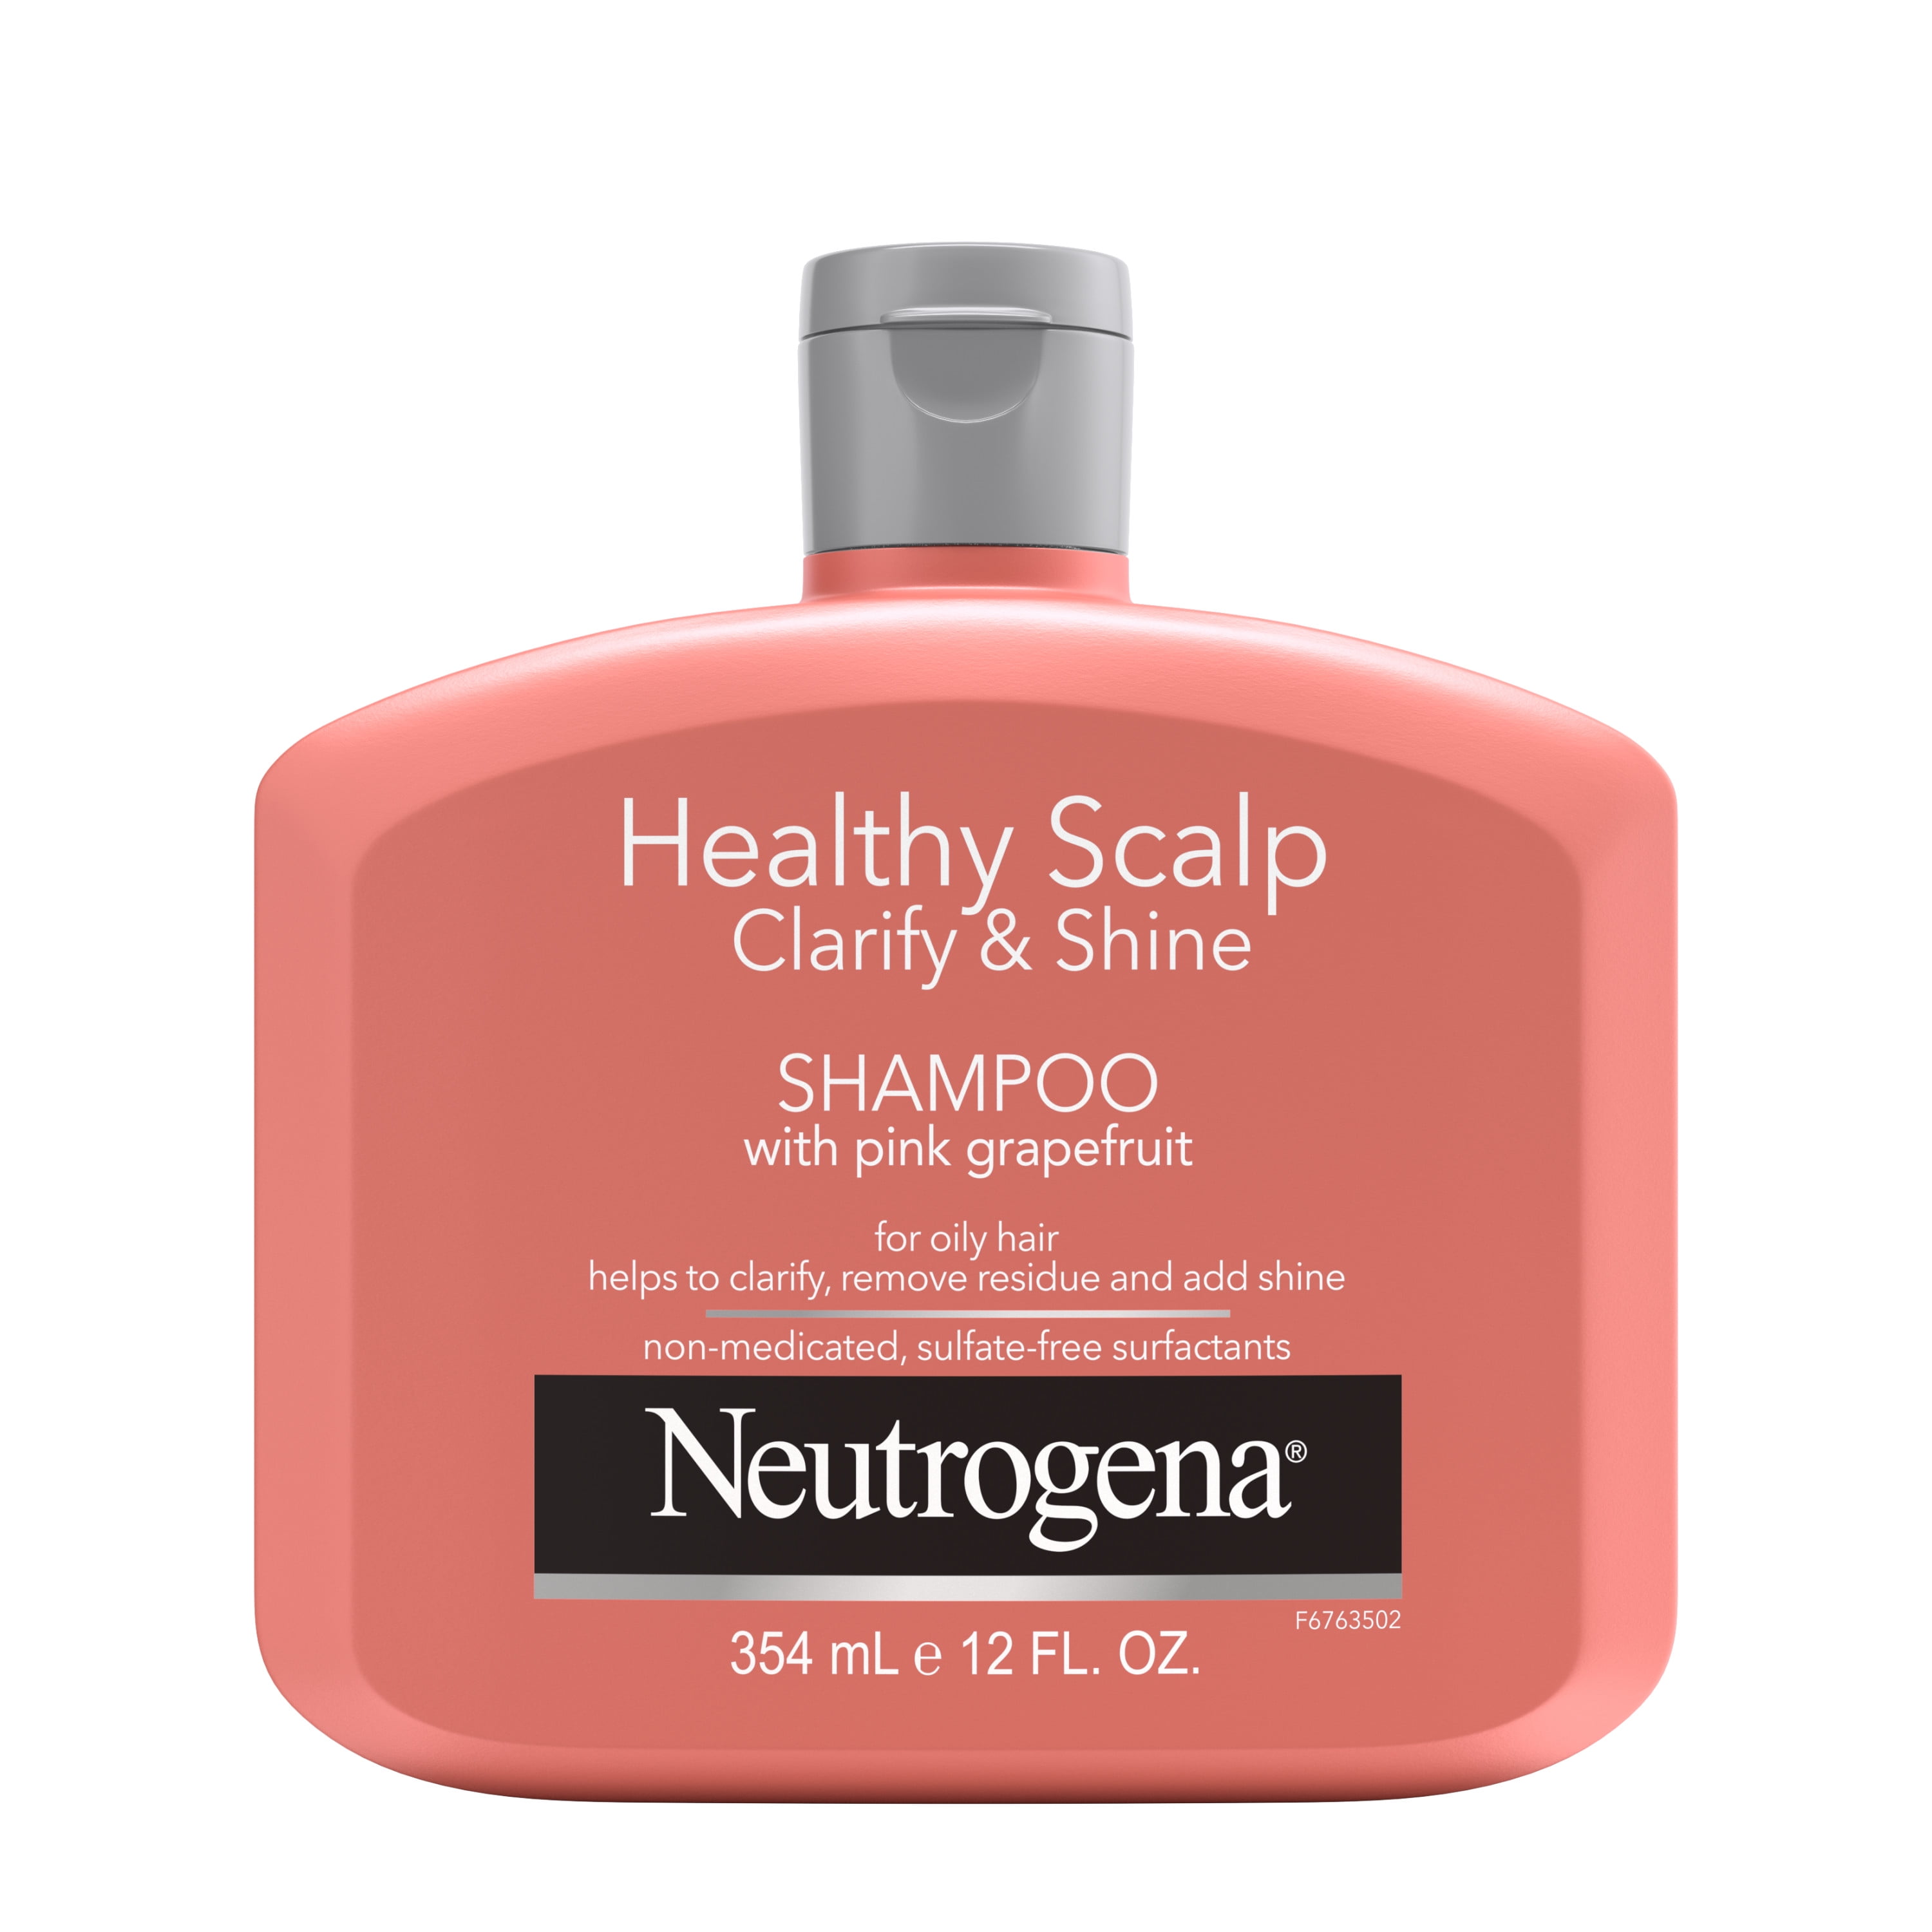 Neutrogena Exfoliating Shampoo for Oily Hair & Scalp with Pink Grapefruit,  Healthy Scalp Clarify & Shine, Sulfate-Free Surfactants, Color-Safe, 12 oz  